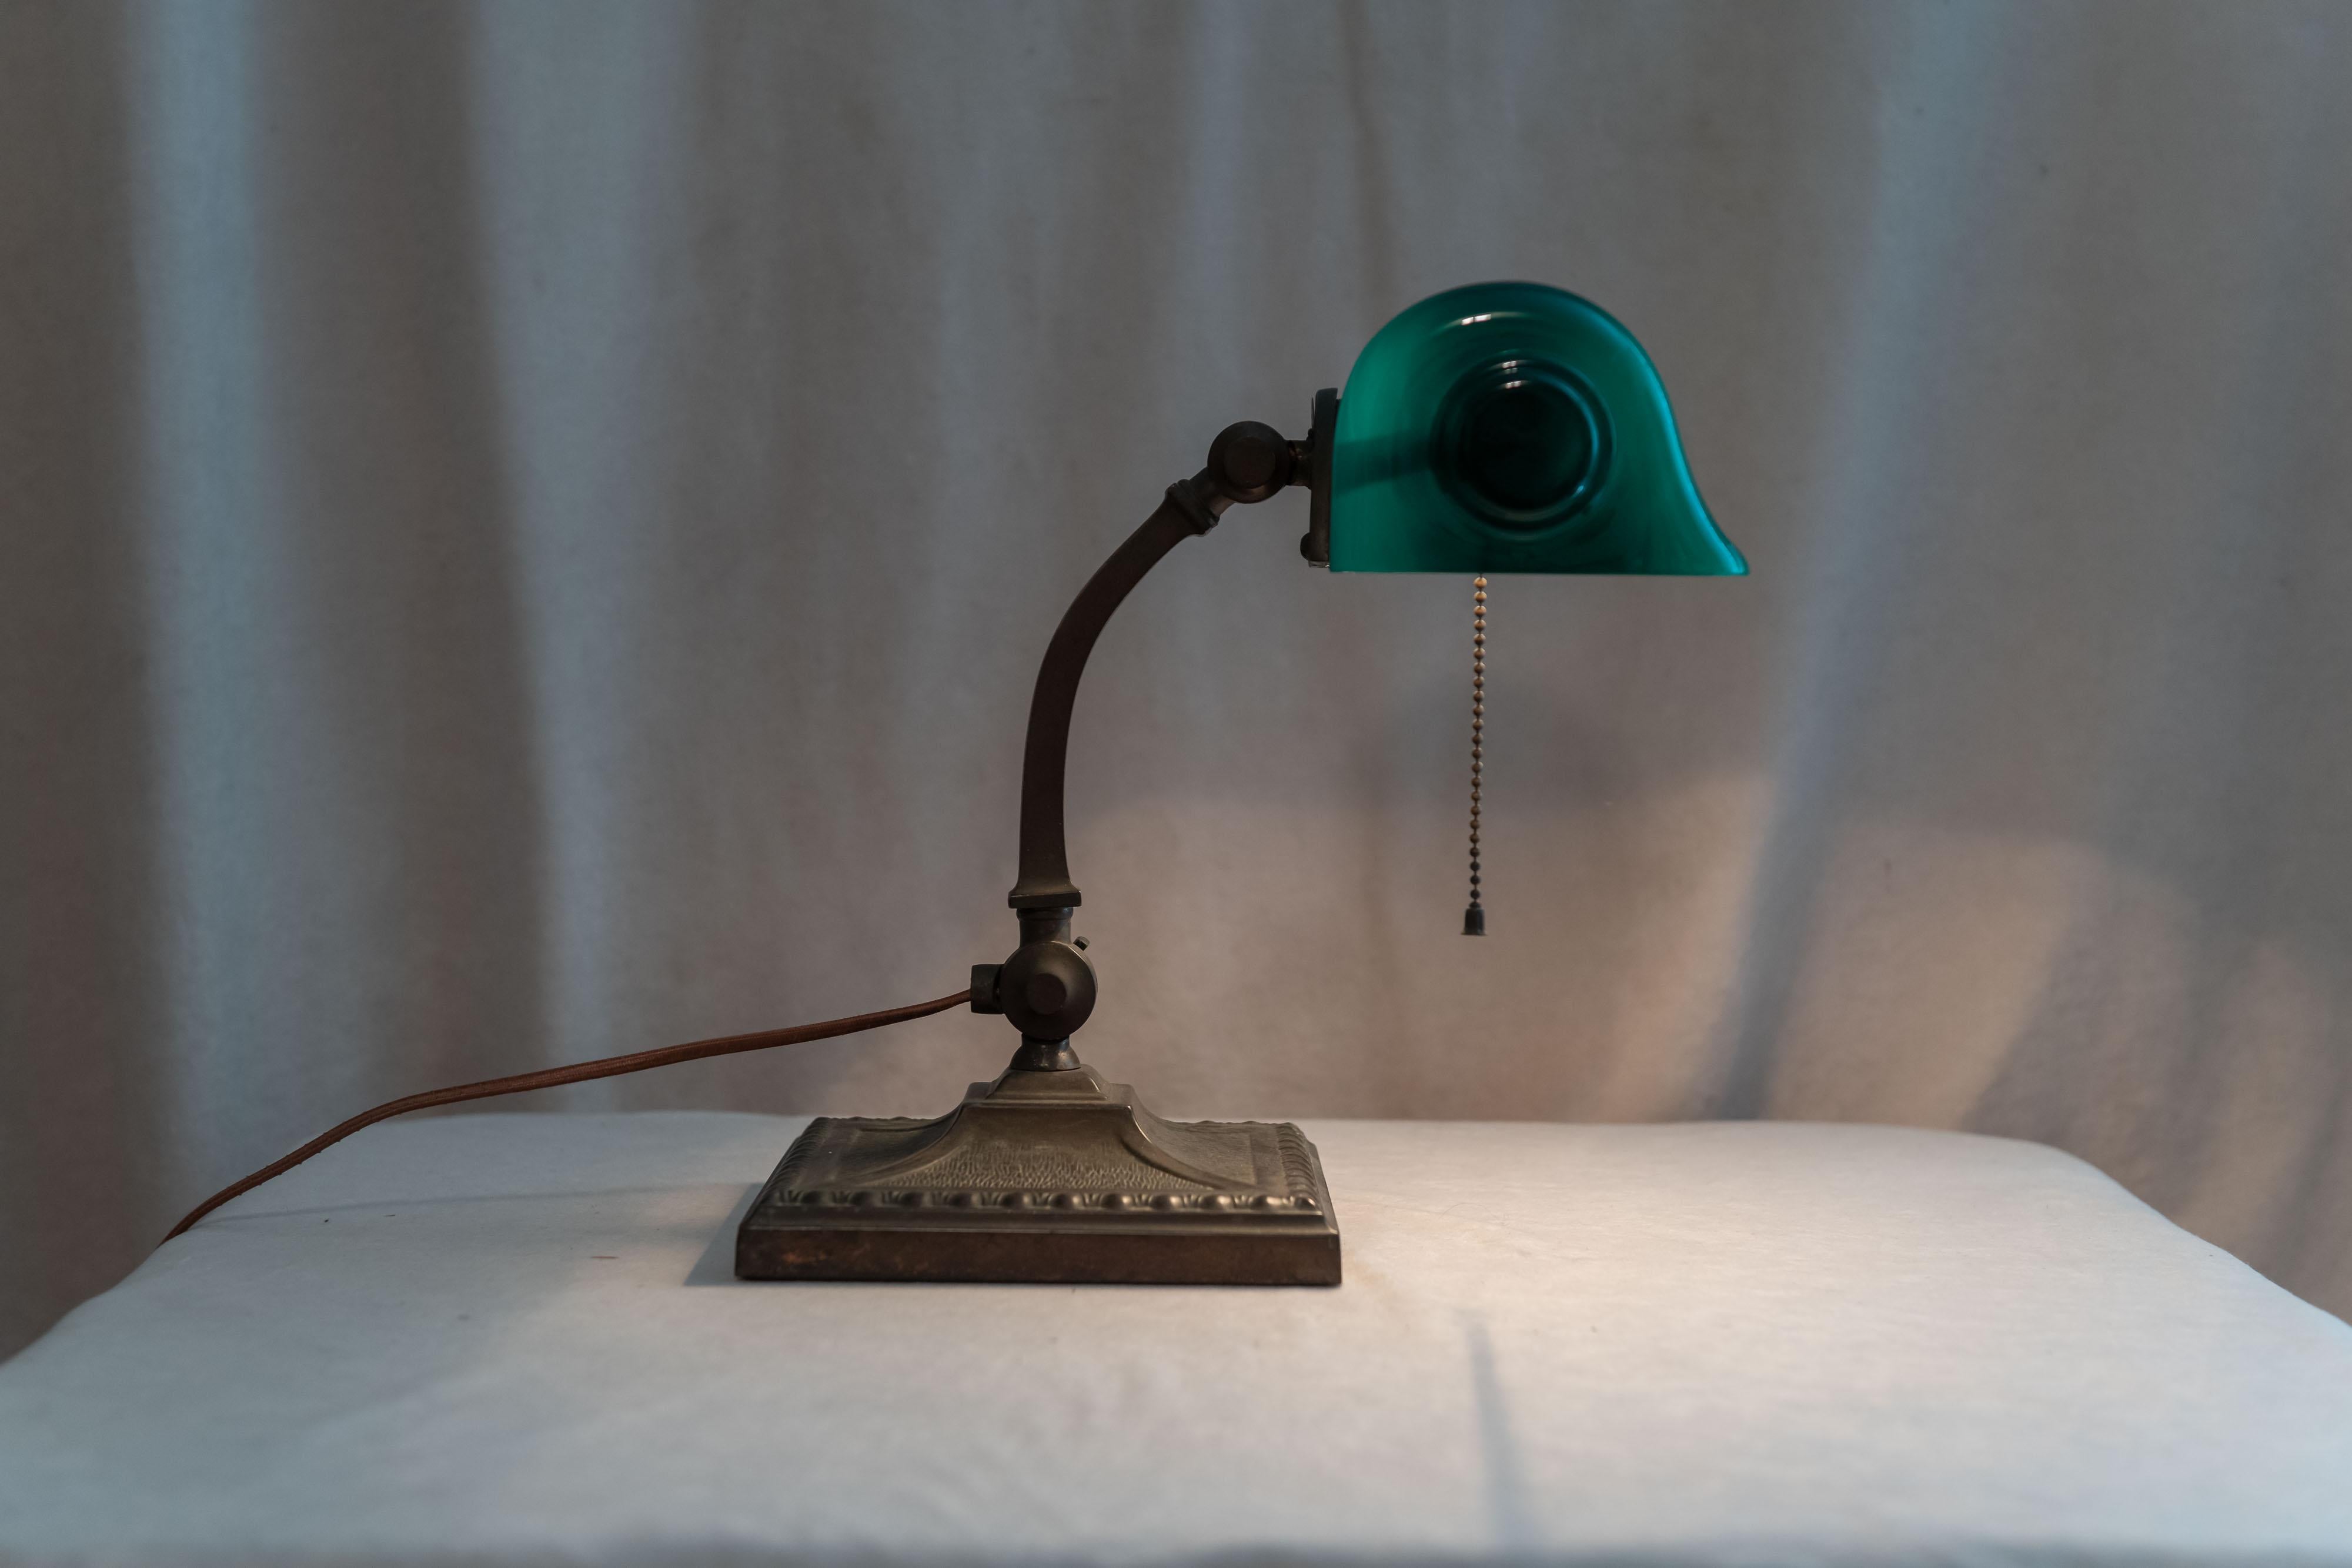 We always on the lookout for these very desirable green shade banker's desk lamps. We believe that the Verdelite Company offers the best example of these, although admittedly Emeralite is the more famous company. The Verdelite shade has those nice